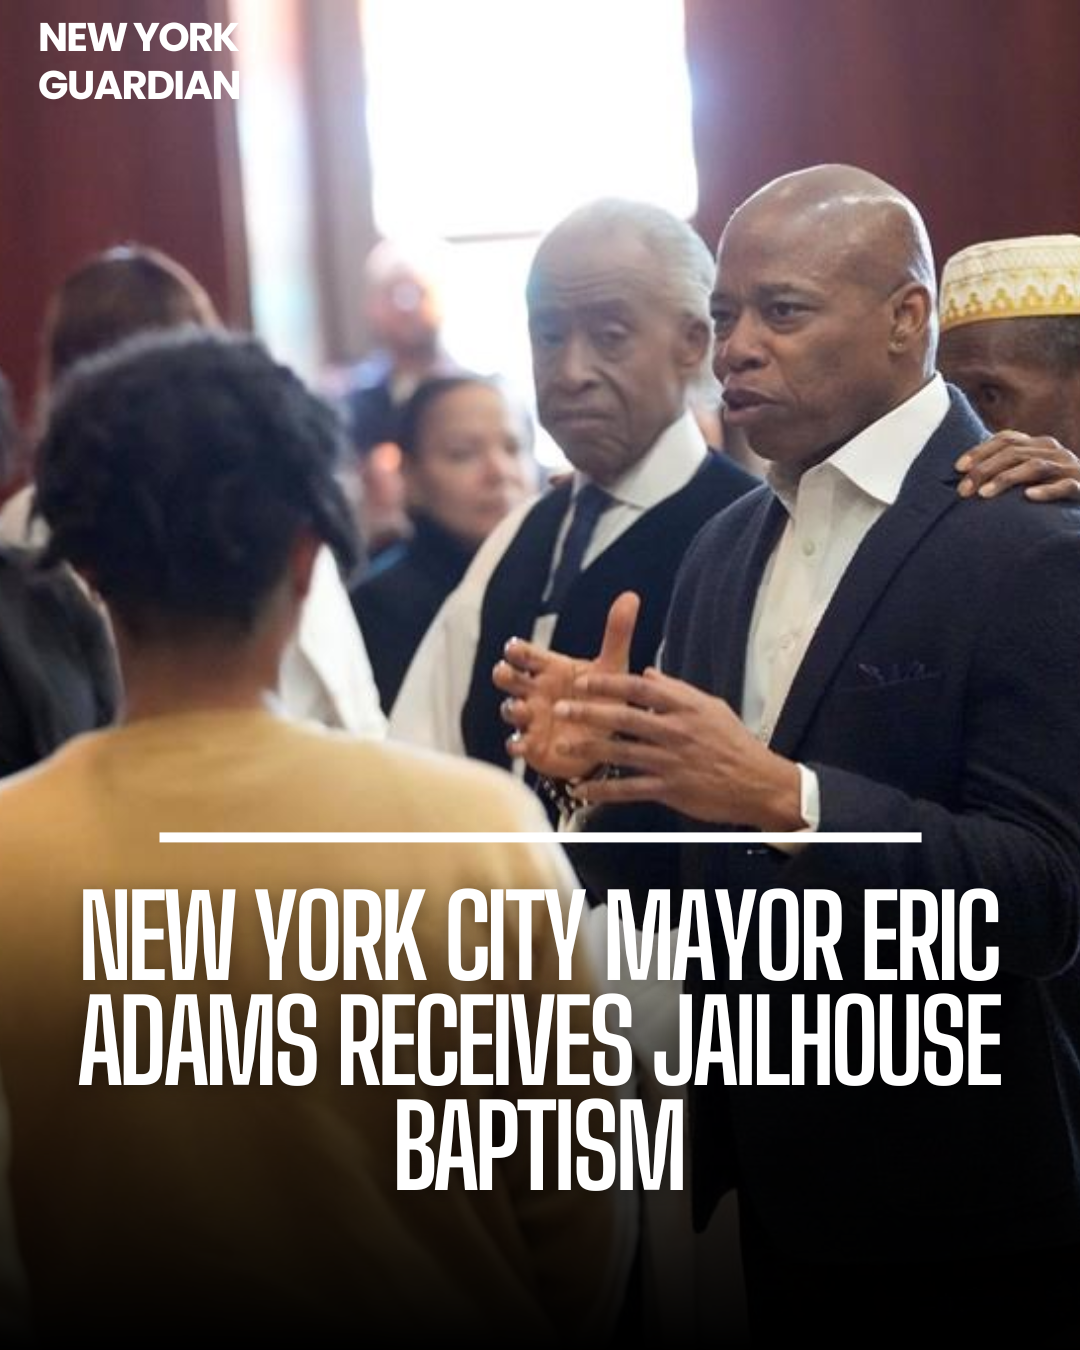 On Good Friday, Mayor Eric Adams took part in a jailhouse baptism led by the Rev. Al Sharpton.